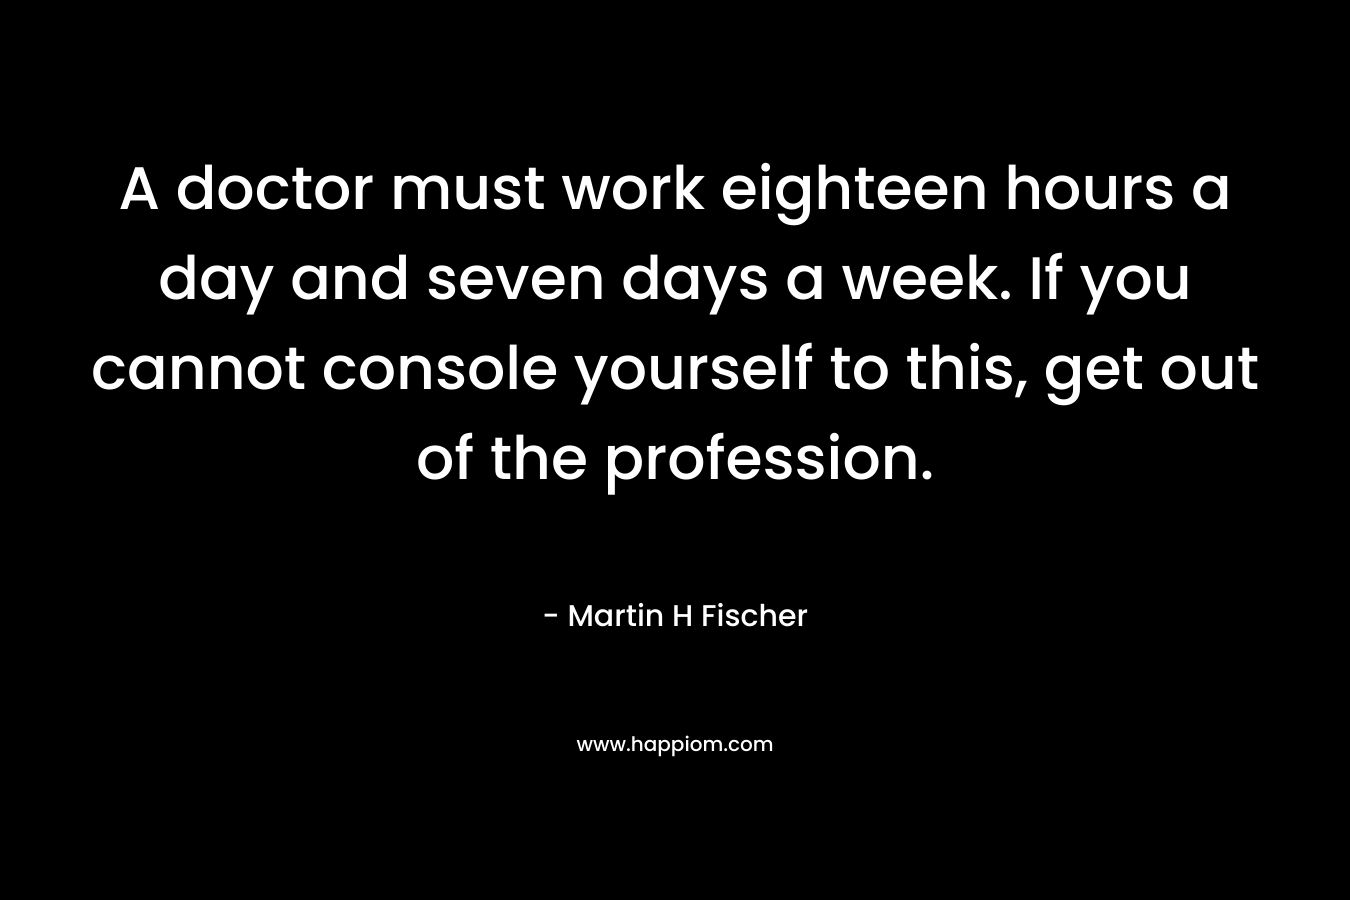 A doctor must work eighteen hours a day and seven days a week. If you cannot console yourself to this, get out of the profession. – Martin H Fischer